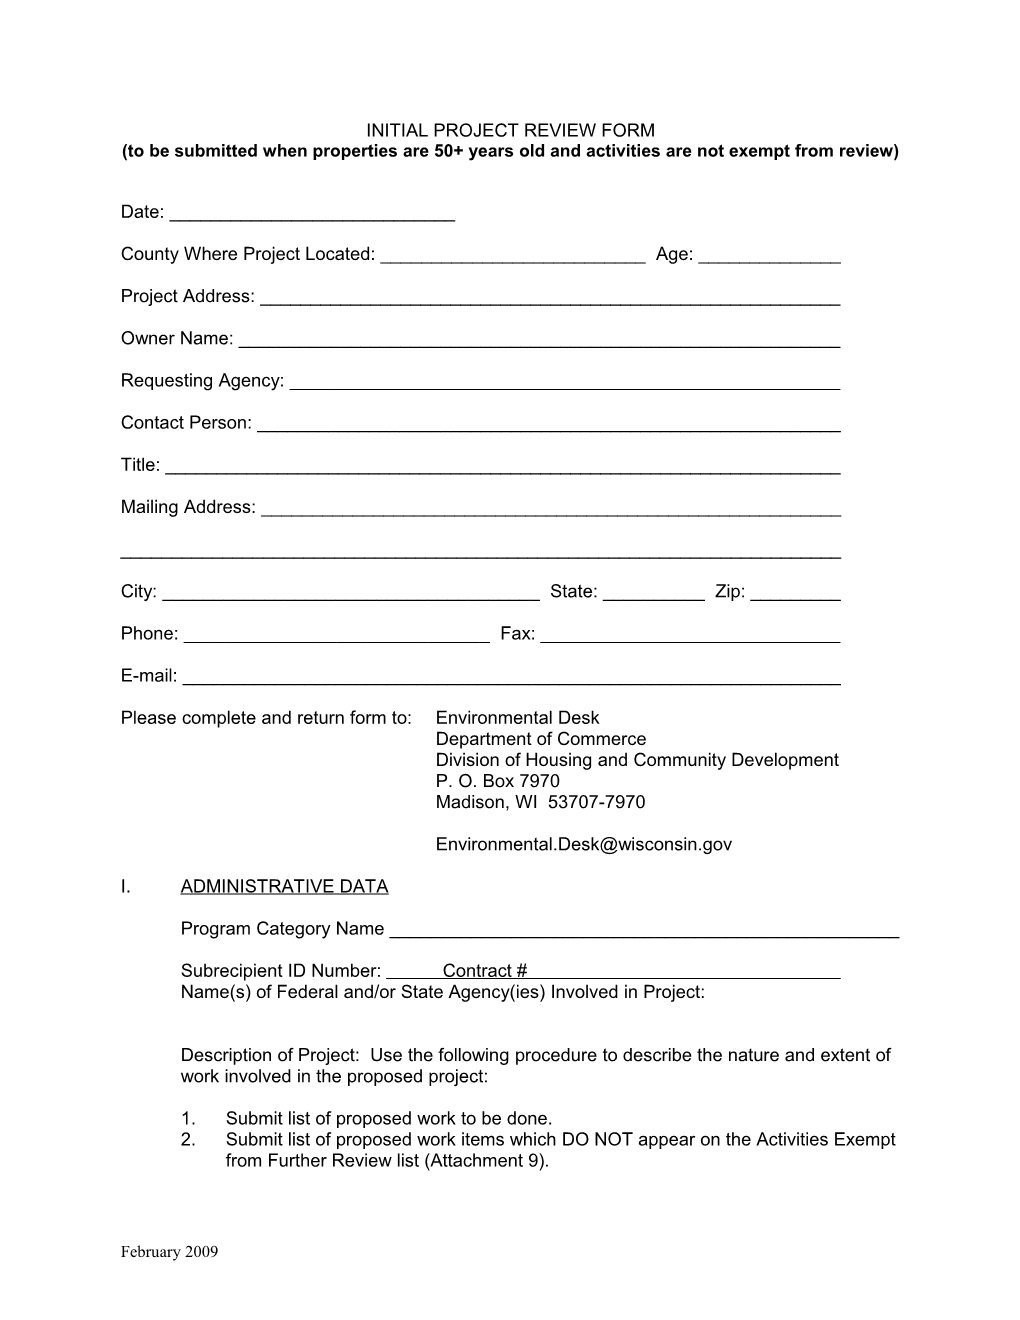 Initial Project Review Form